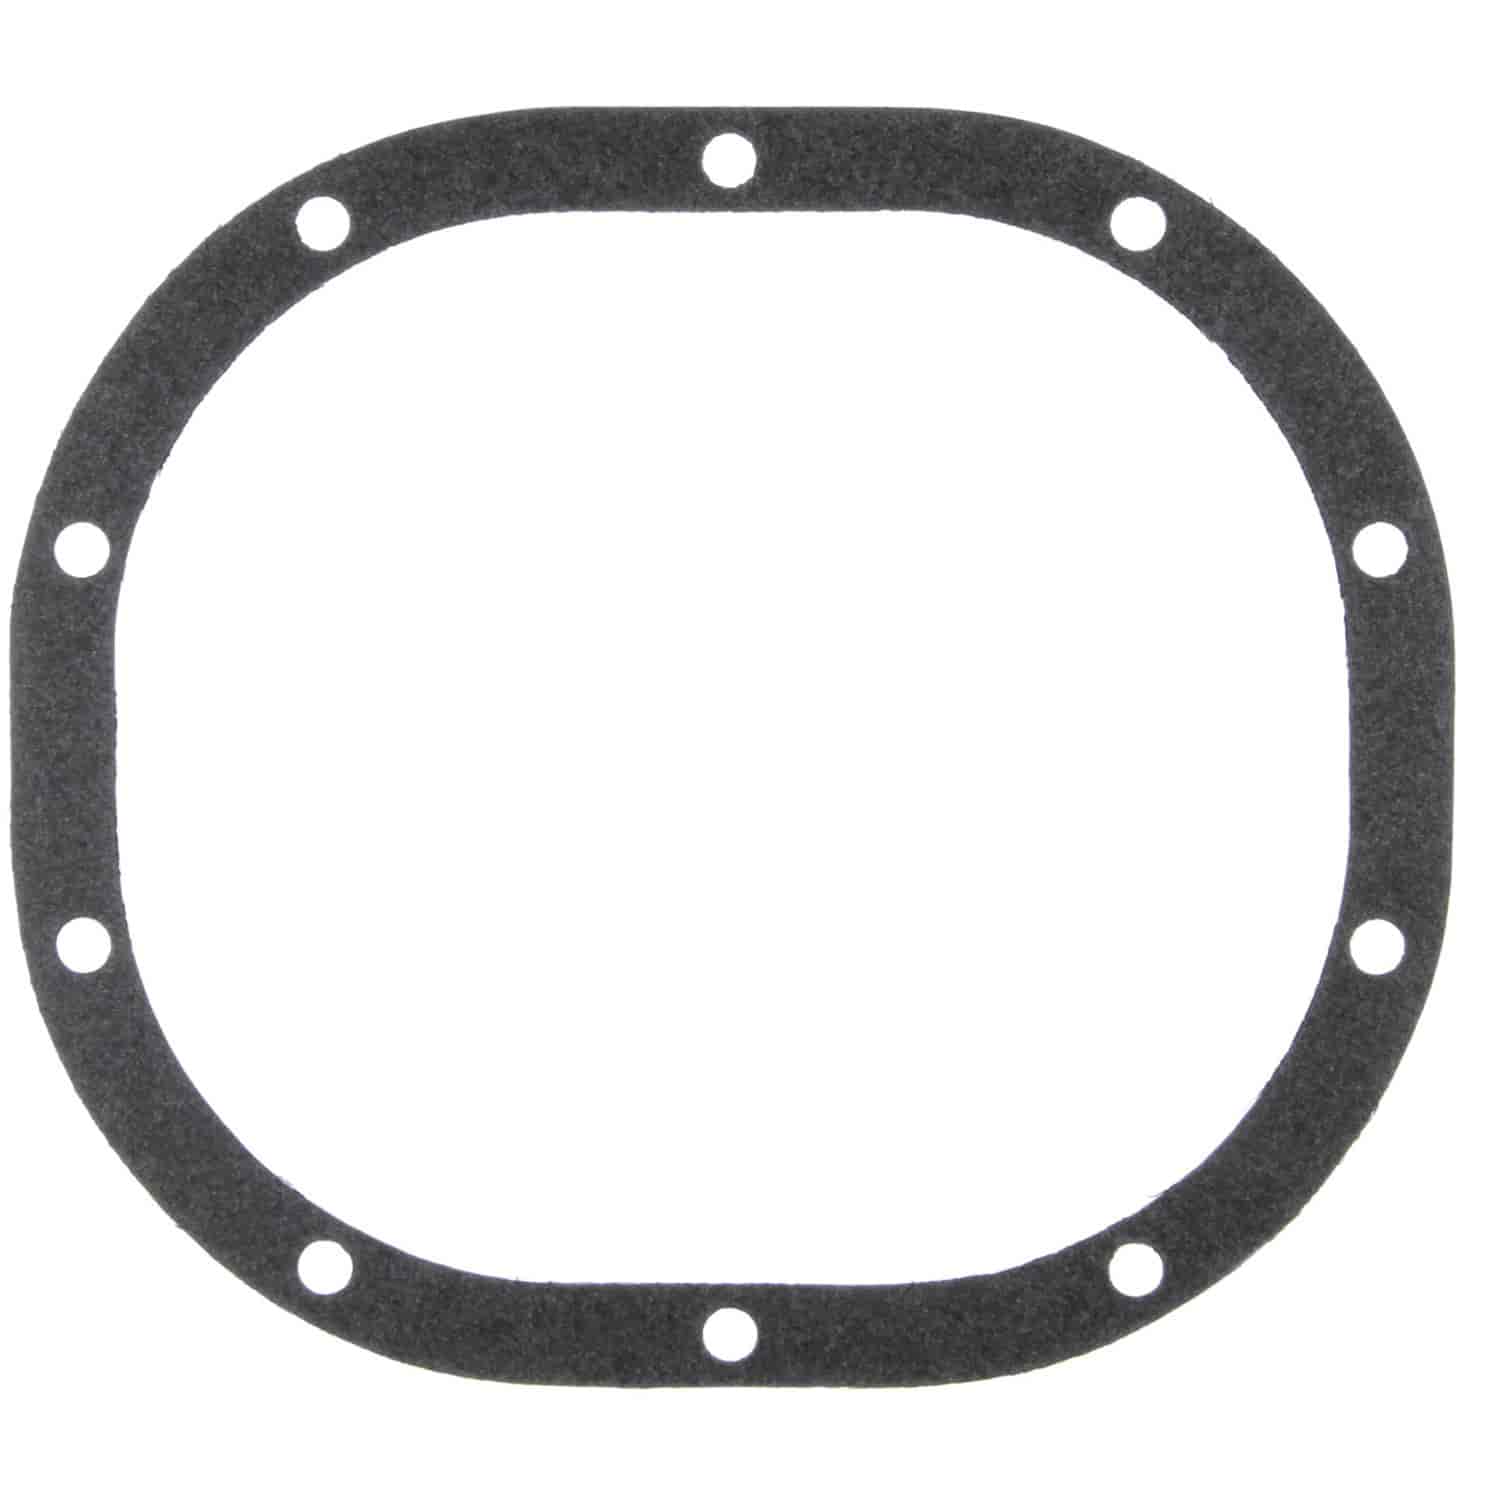 Differential Carrier Gasket Ford 8" & 9" Gear